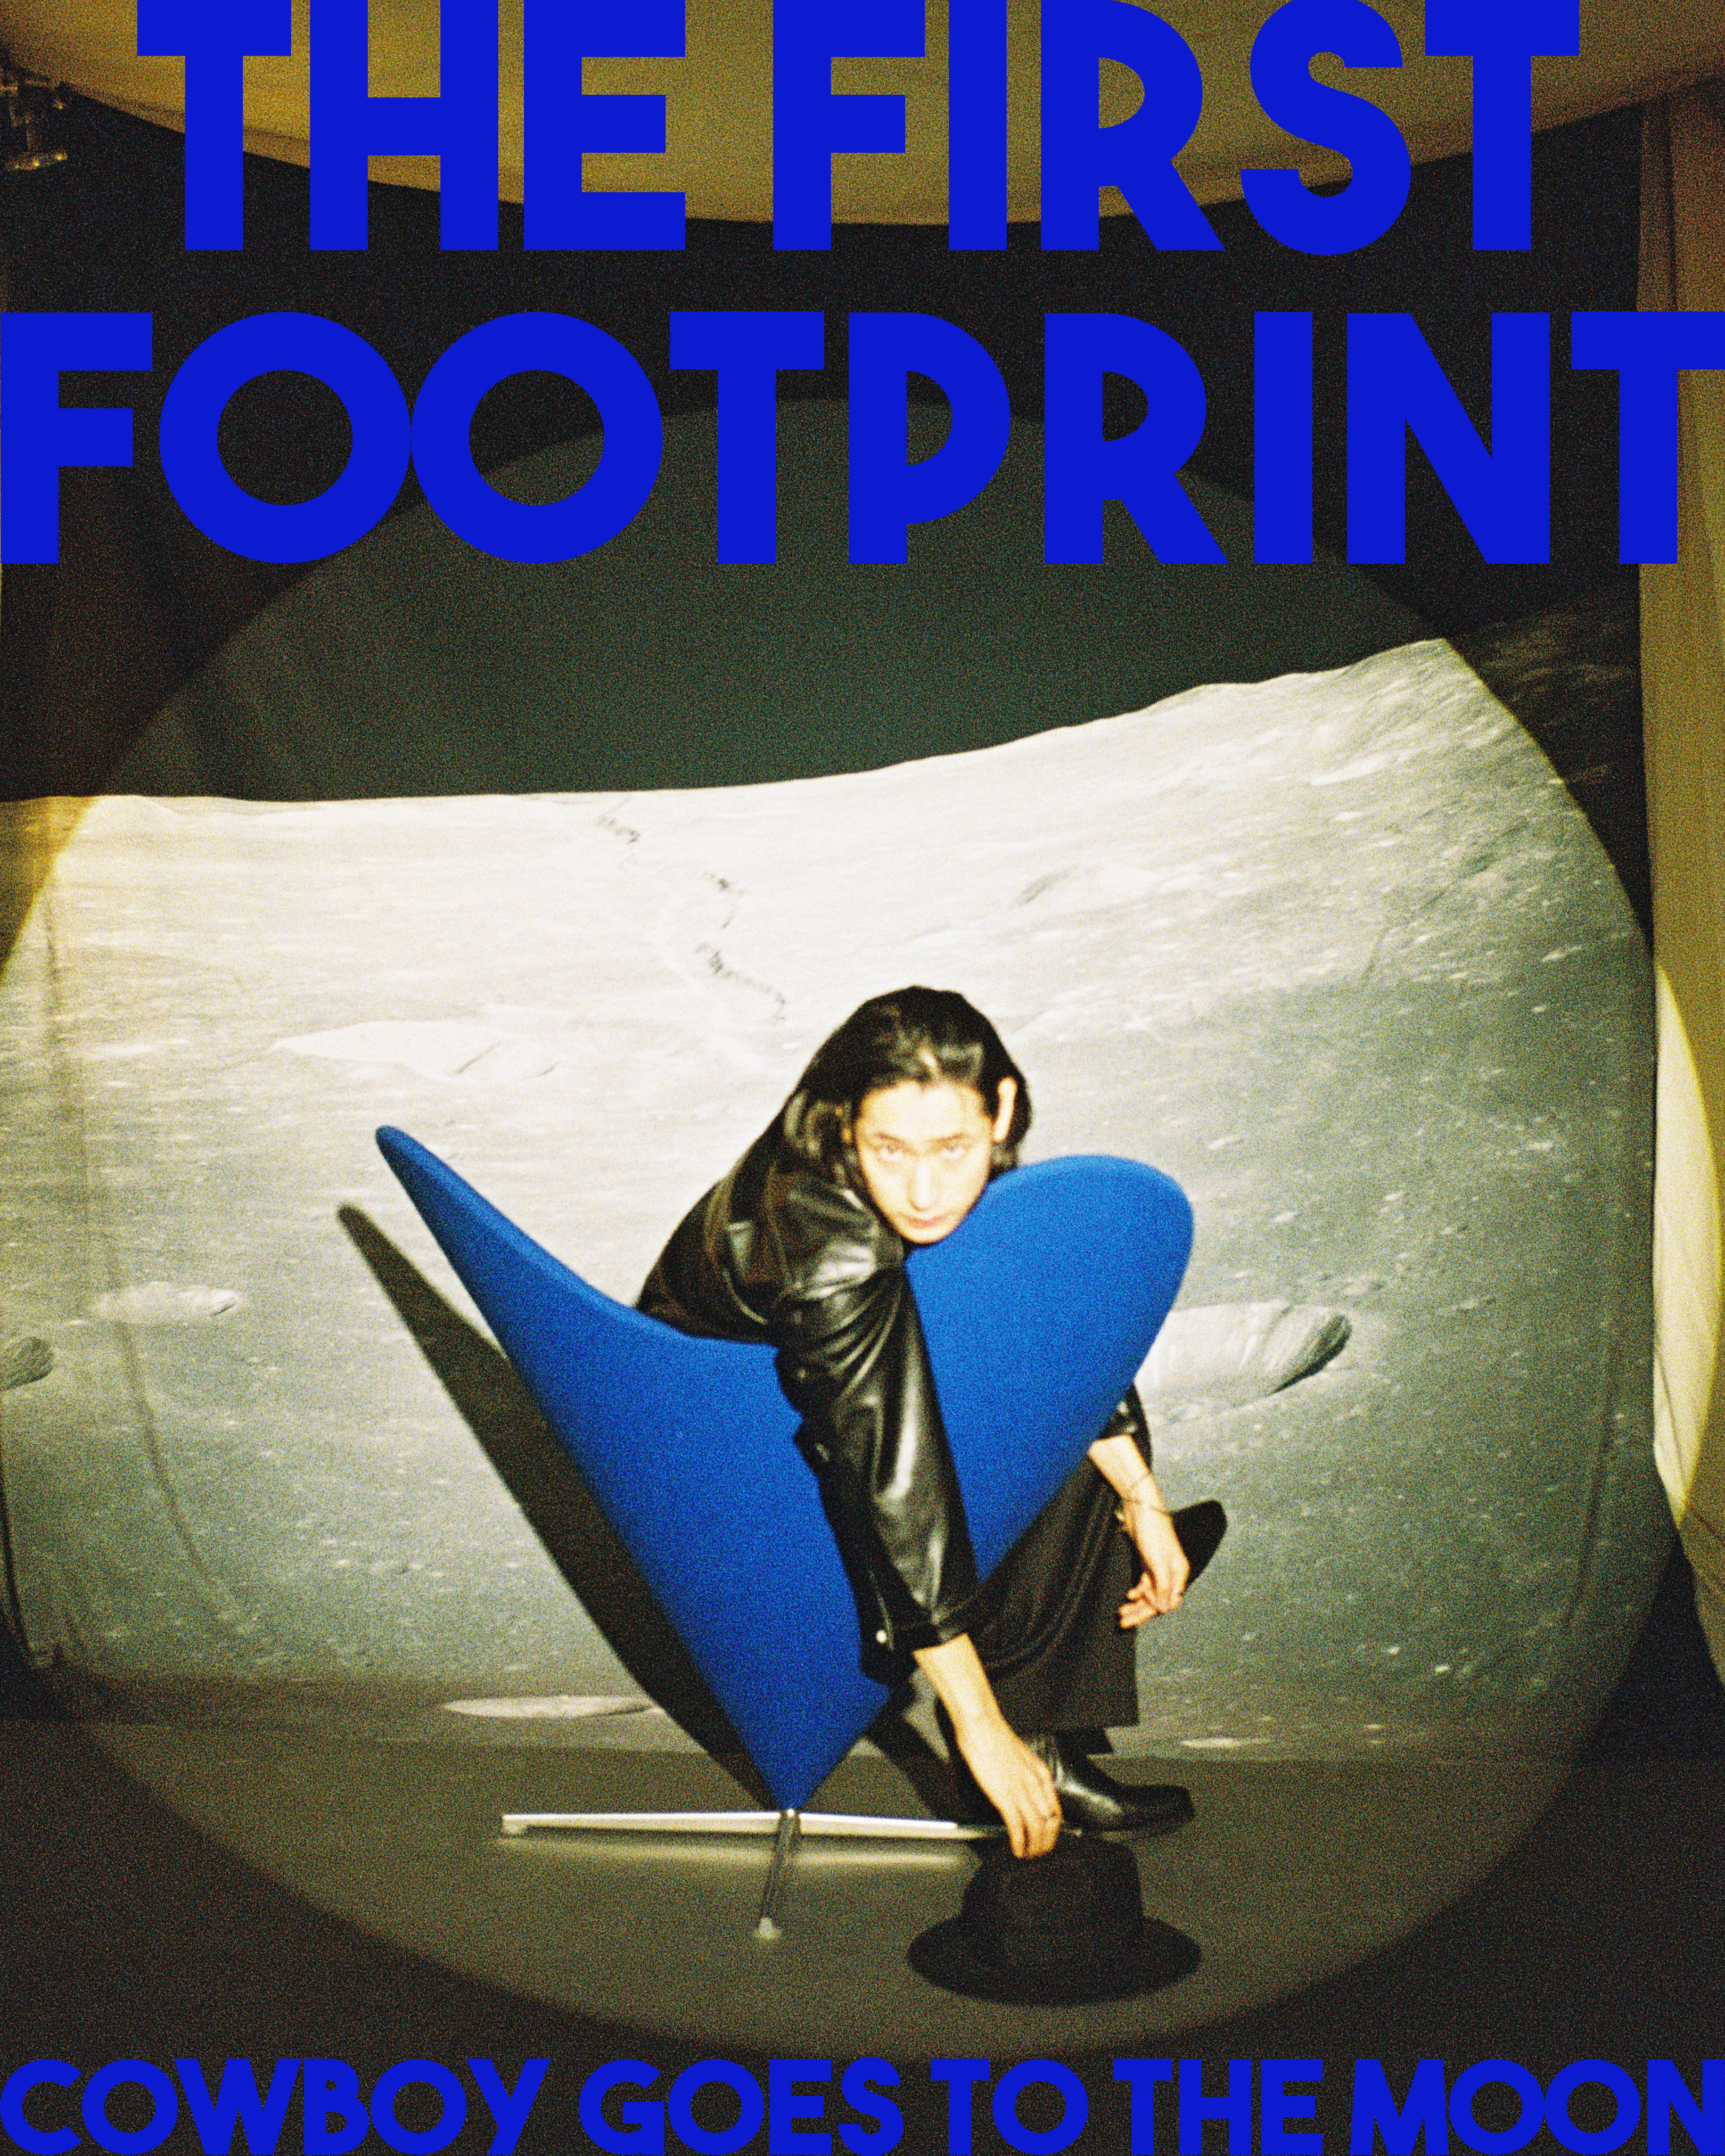 APART FROM THAT EDITORIAL 2021&quot;THE FIRST FOOTPRINT&quot;